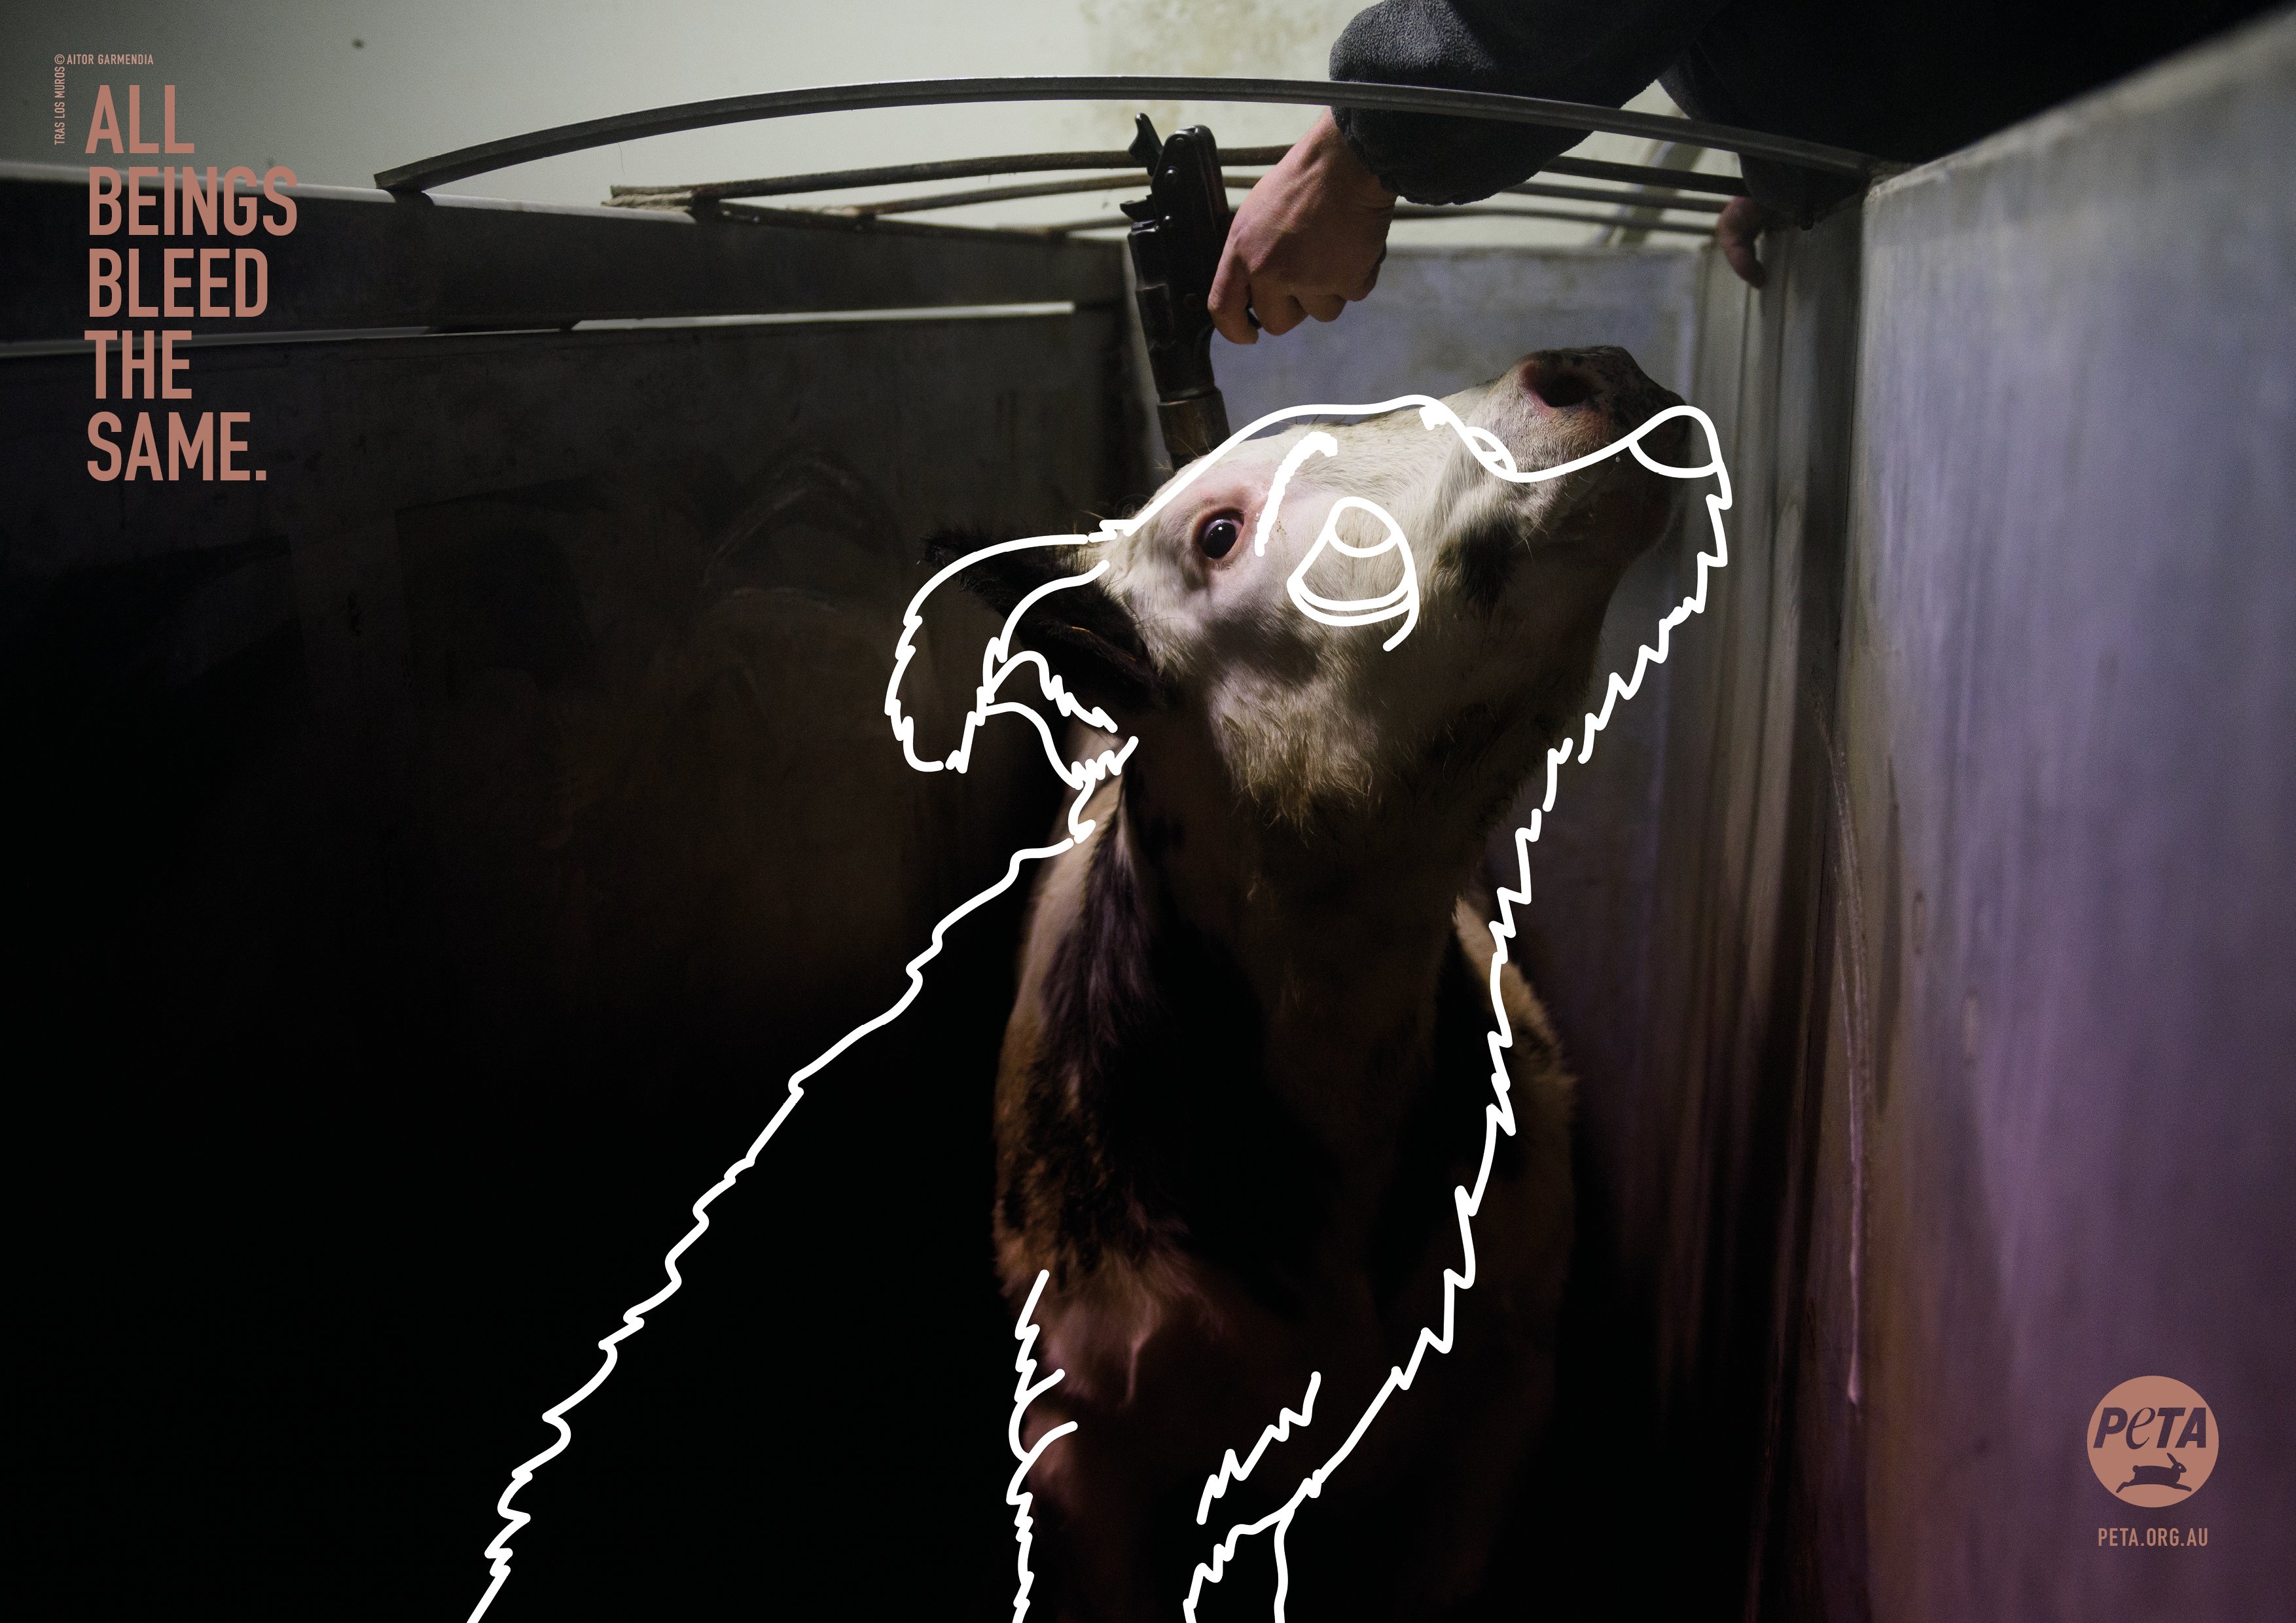 In abattoirs, pigs and cows are hoisted upside down by their back legs and their throats are cut, even though they often haven't been properly stunned. If you aren't already repulsed by that fact, would it shock you if the victim were instead a dog? Shocking new PETA ads aim to challenge viewers to question why they love some animals but eat others.